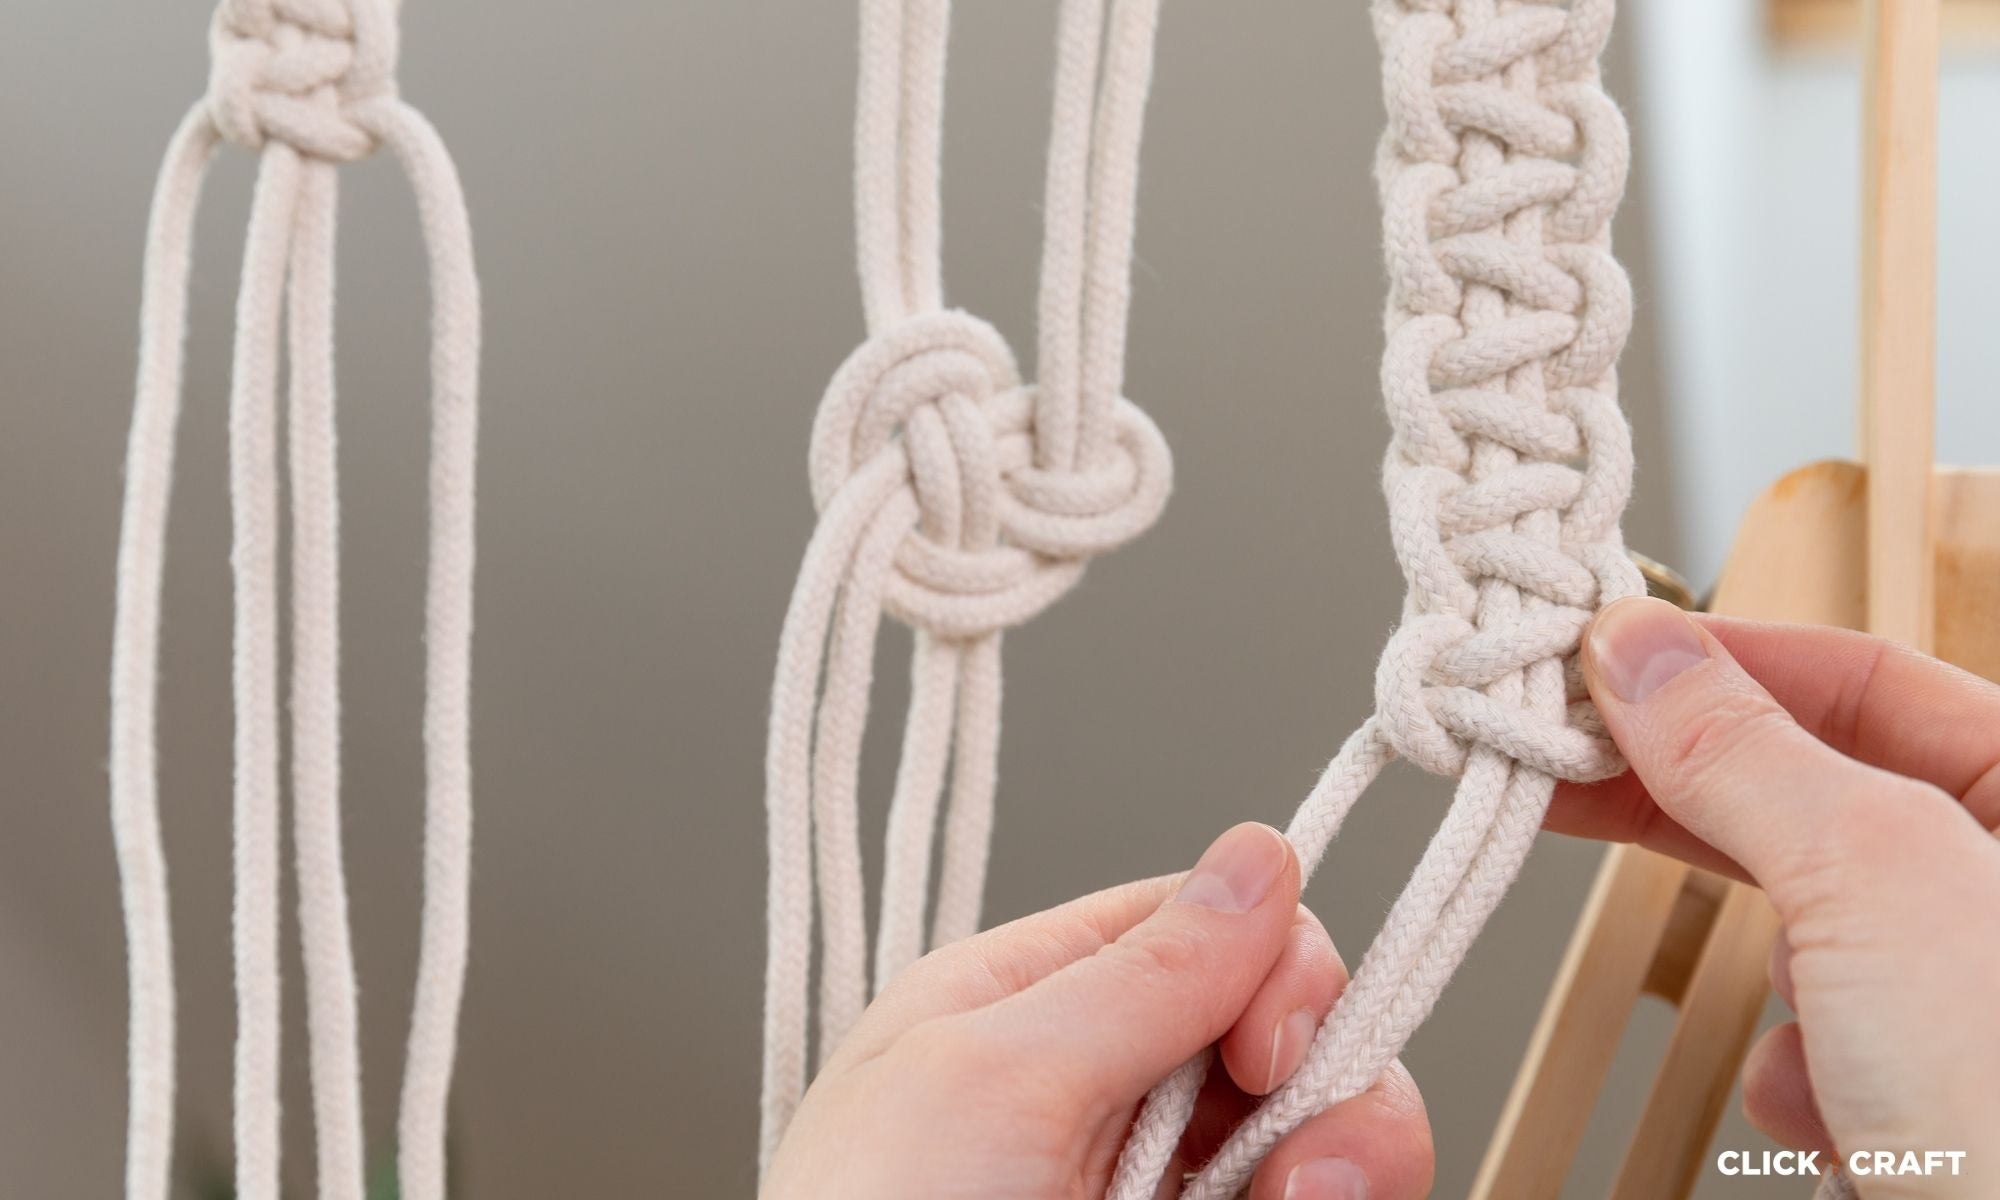 Learn How To Make The Macrame Knots For Wall Hangings and Plant Hangers